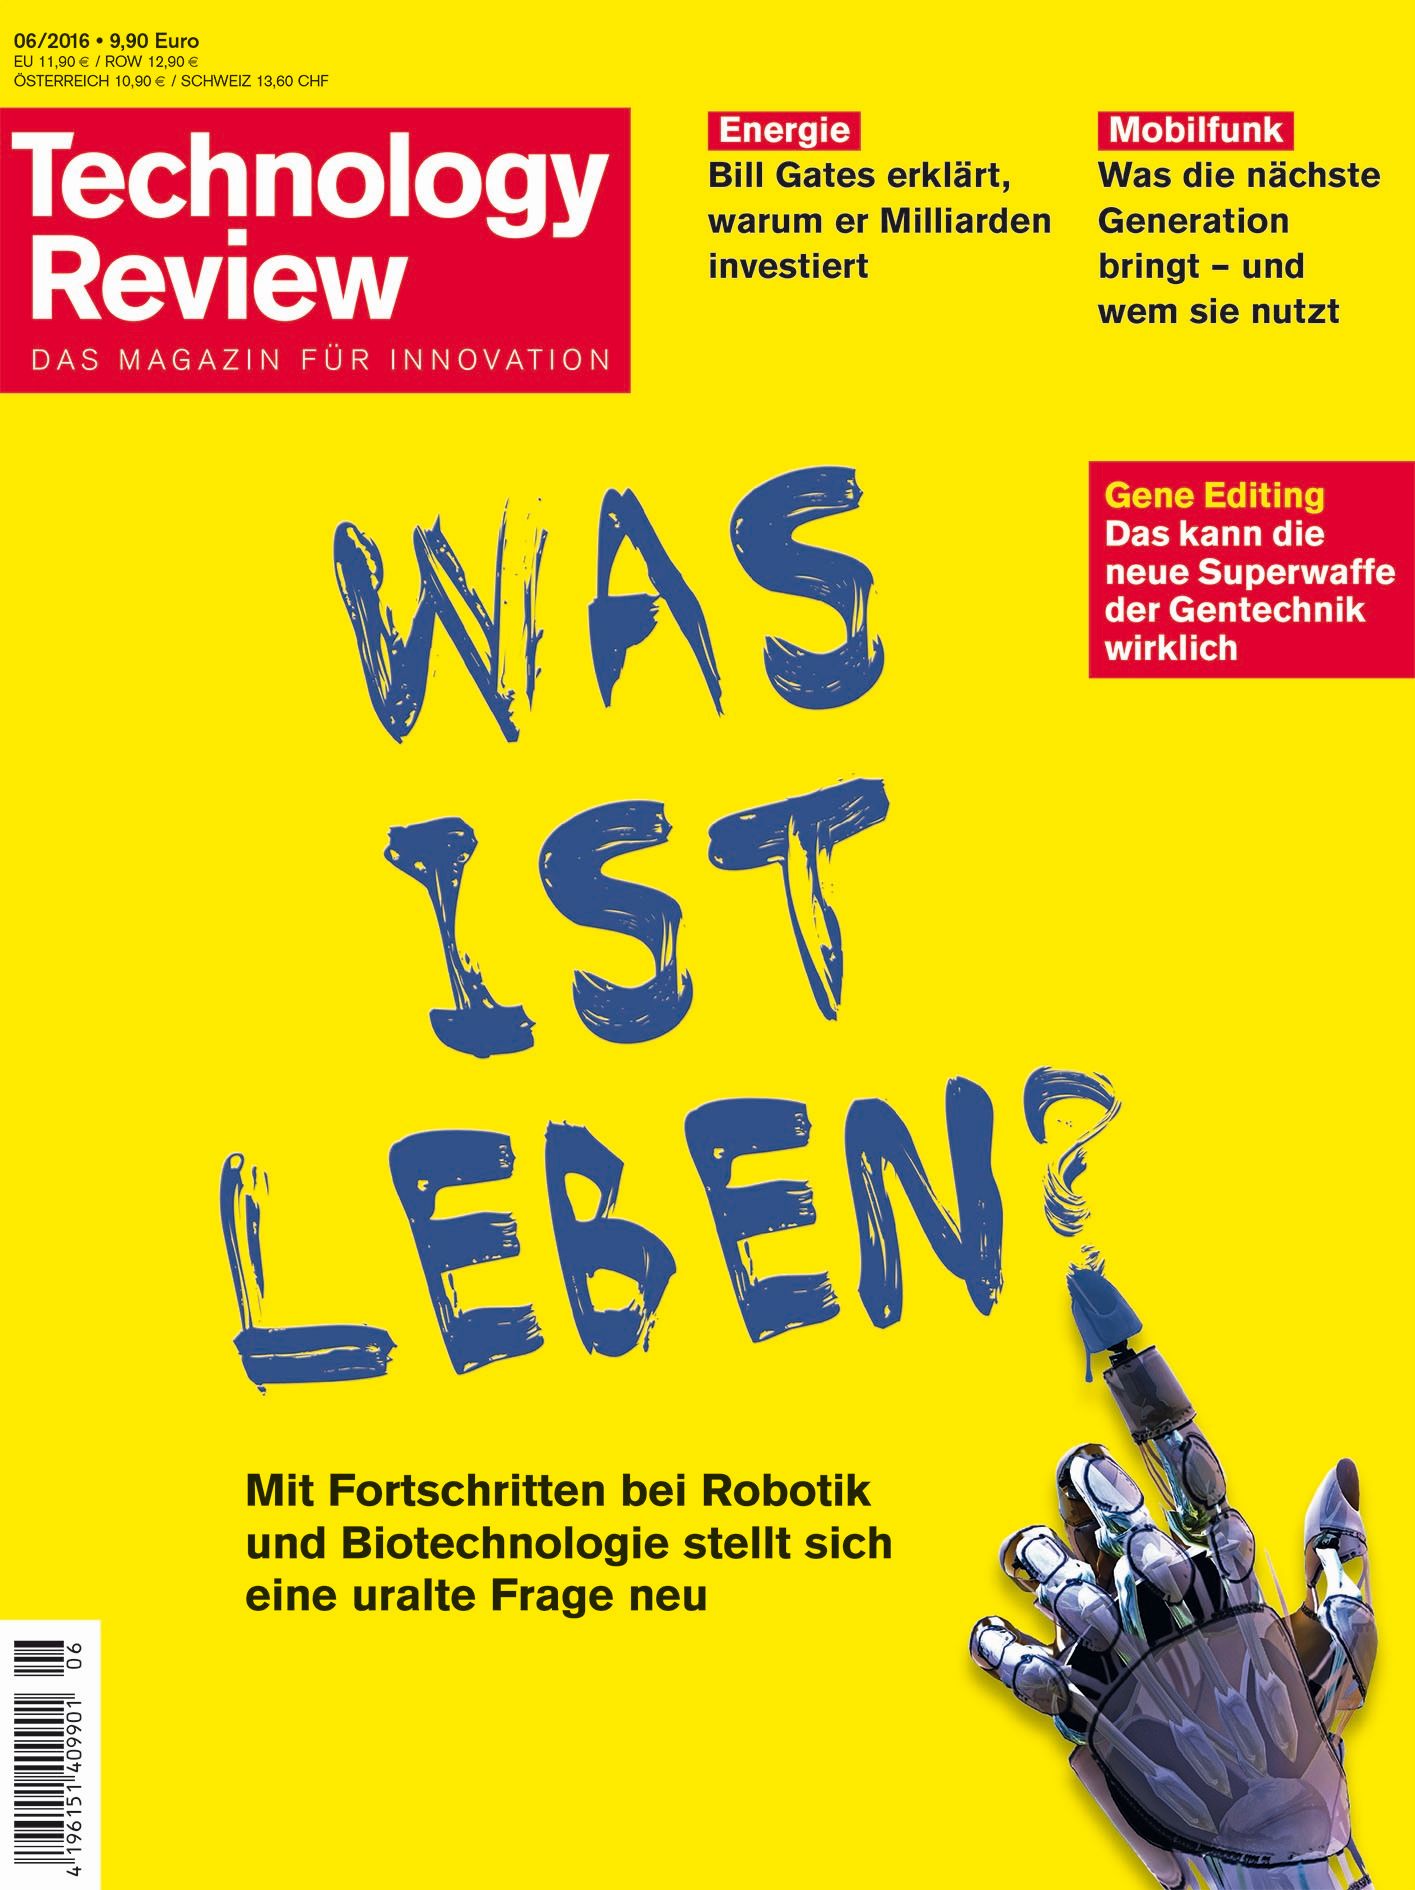 Technology Review 06/2016